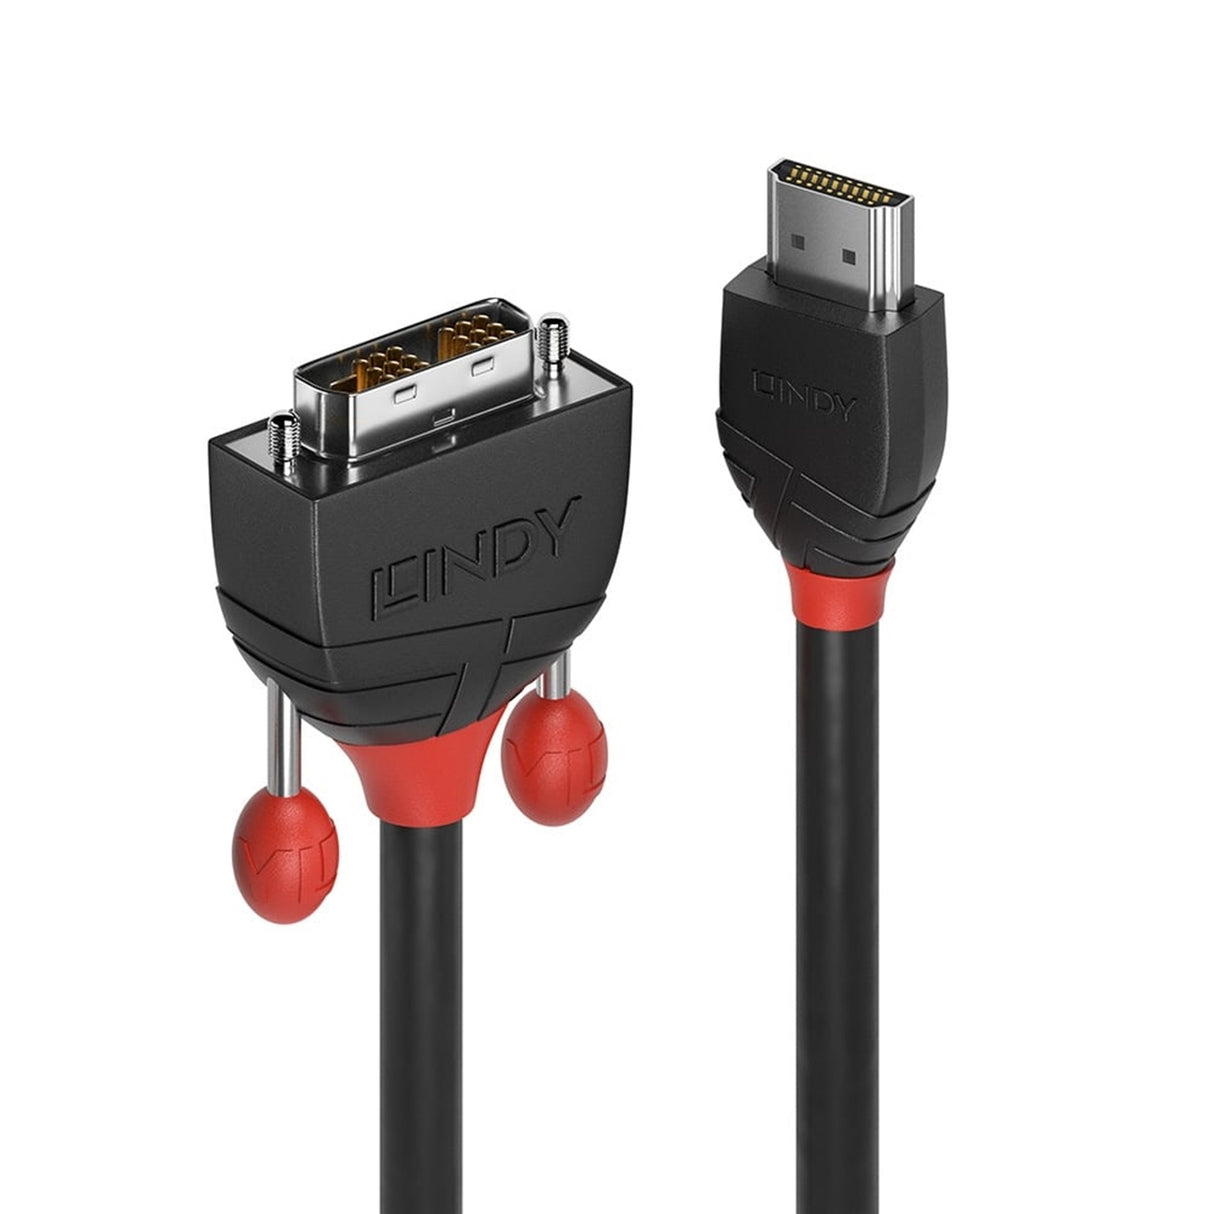 LINDY 36271 Black Line Converter Cable, HDMI (M) to DVI-D Single Link (M), 1m, Black & Red, Supports DVI Resolutions up to 1920x1200@60Hz & HDTV up to 1080p, Triple Shielded Cable, Corrosion Resistant Tinned Copper with 30AWG Conductors, Retail Polybag Pa